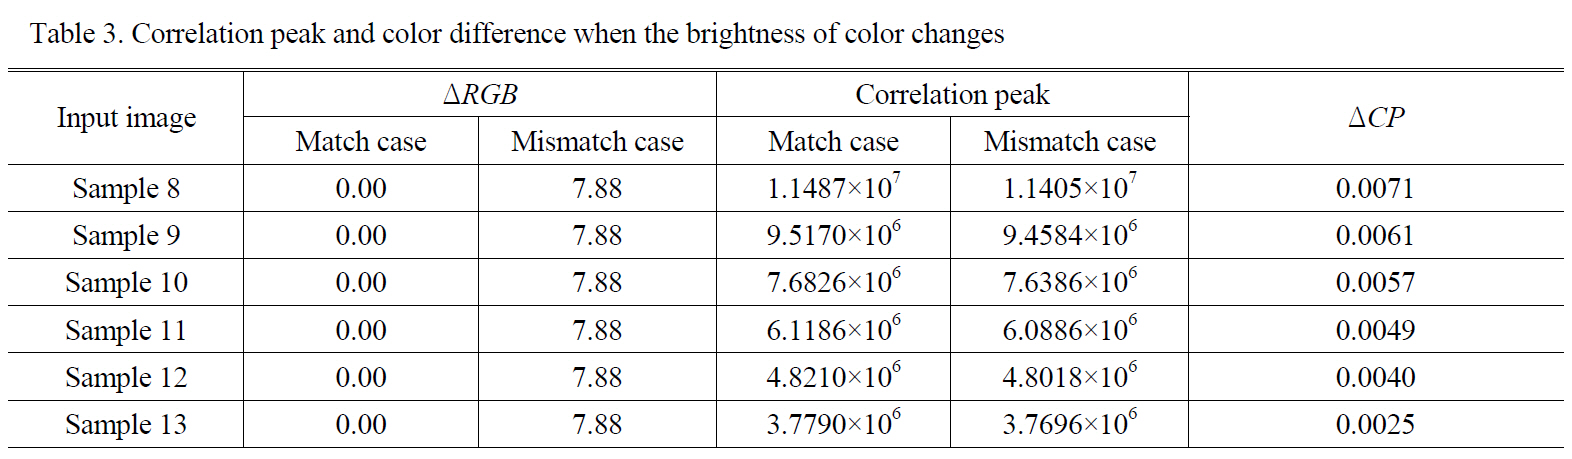 Correlation peak and color difference when the brightness of color changes